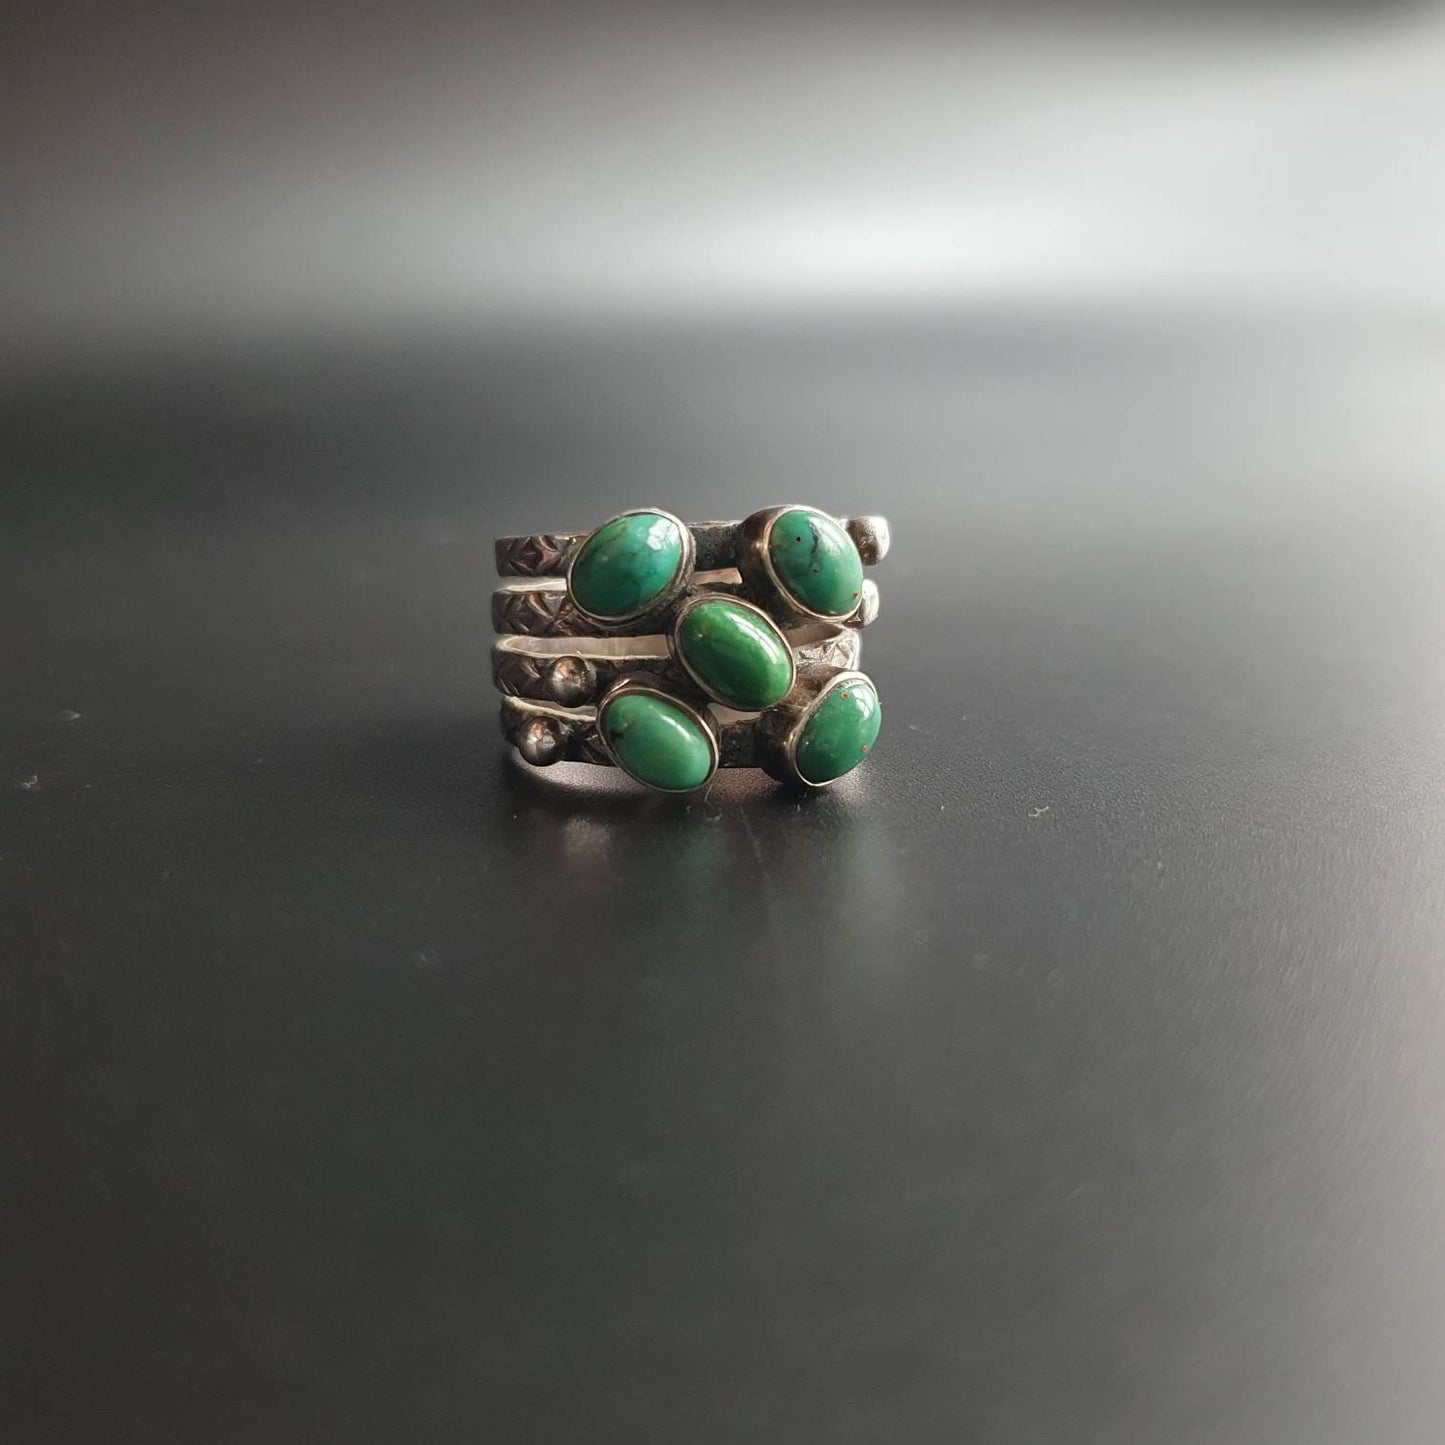 Turquoise ring, multi stone ring, sterling silver jewelry, vintage, handmade, stackable rings, statement jewelry, gifts, unisex, Navajo